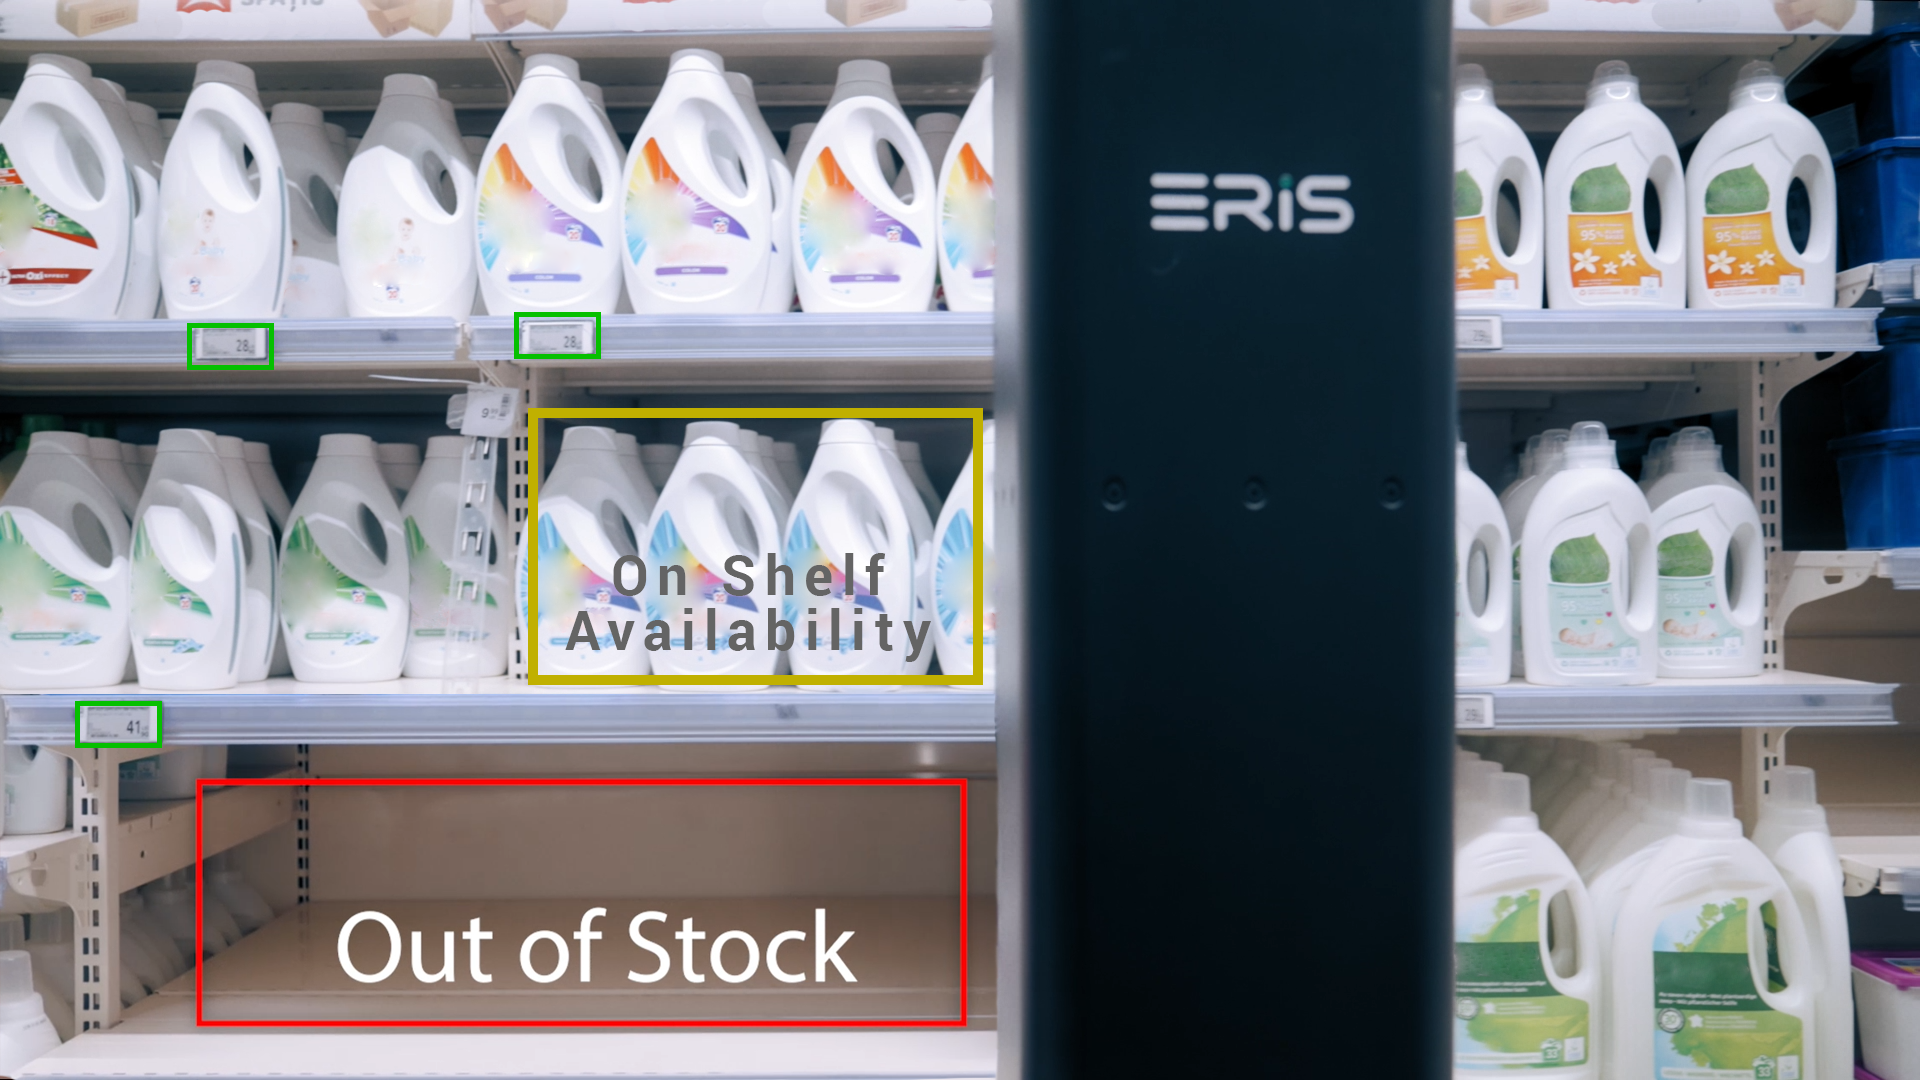 The out of stock detection of the ERIS Robot; Copyright: